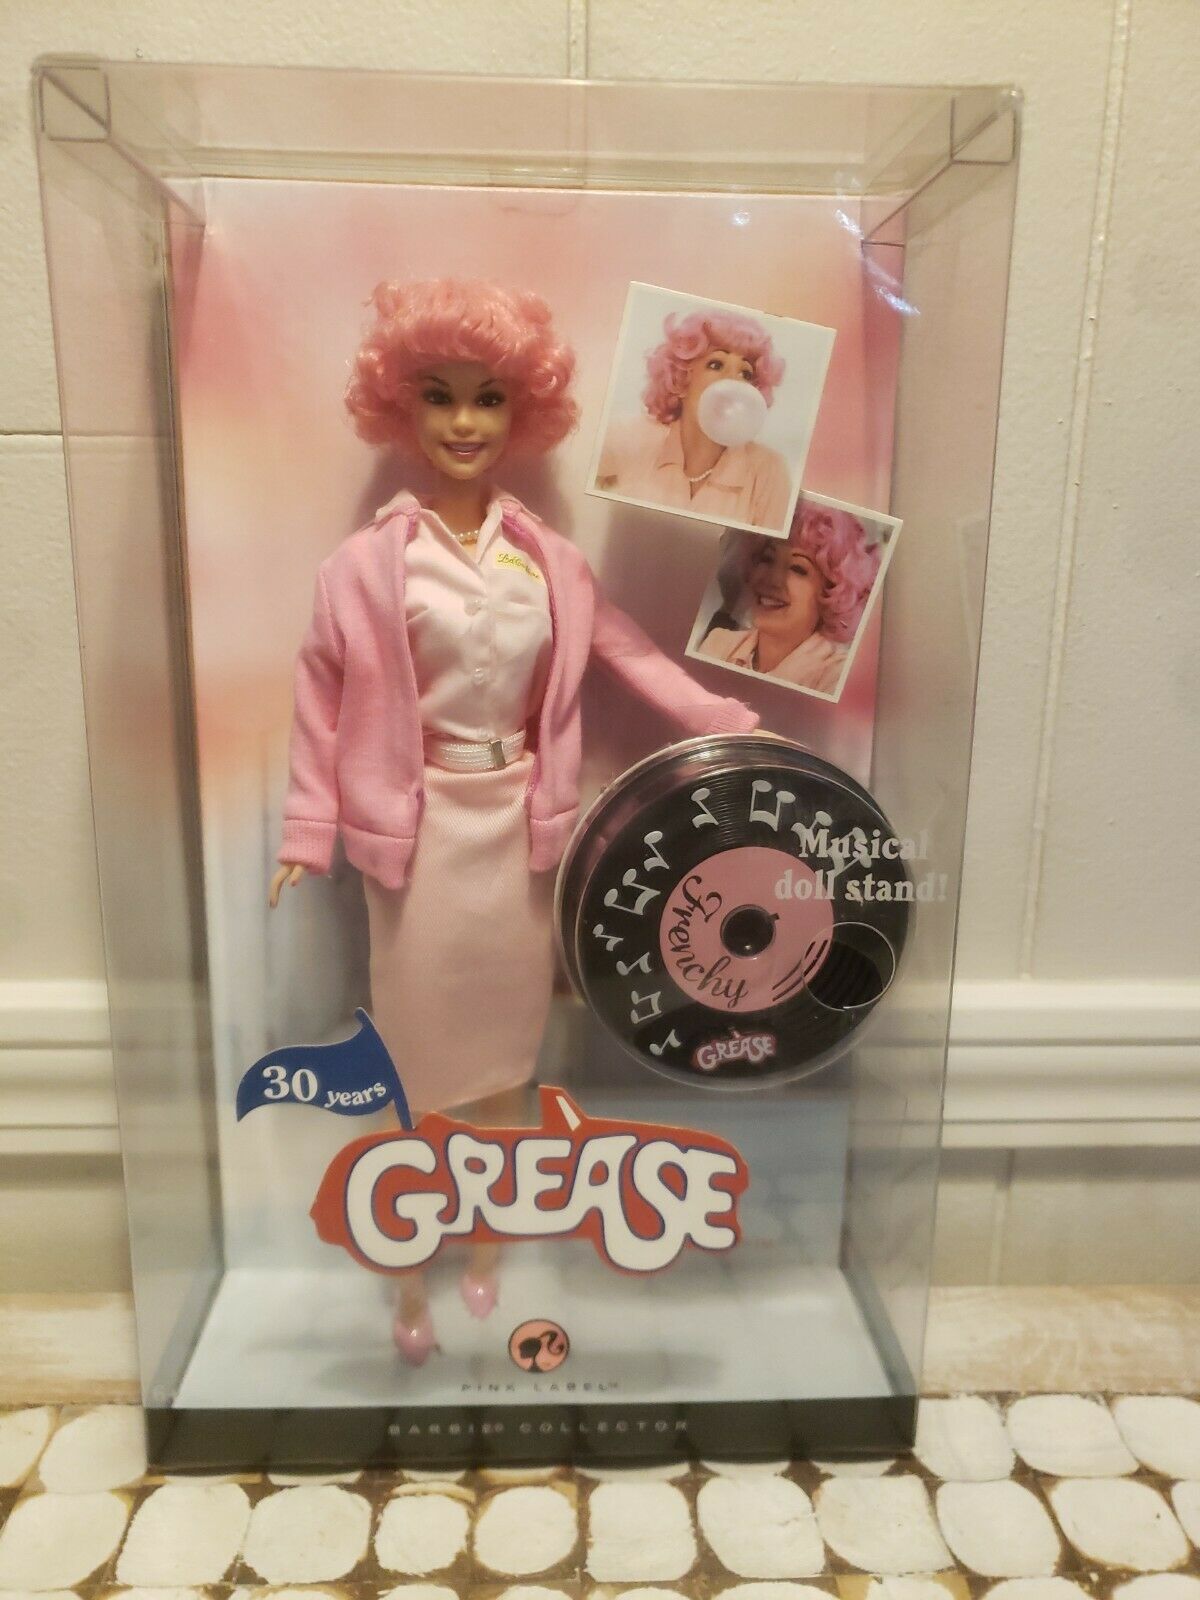 Barbie Pink Label Collector Series Grease 30 Years Frenchy Doll Unopened Box.